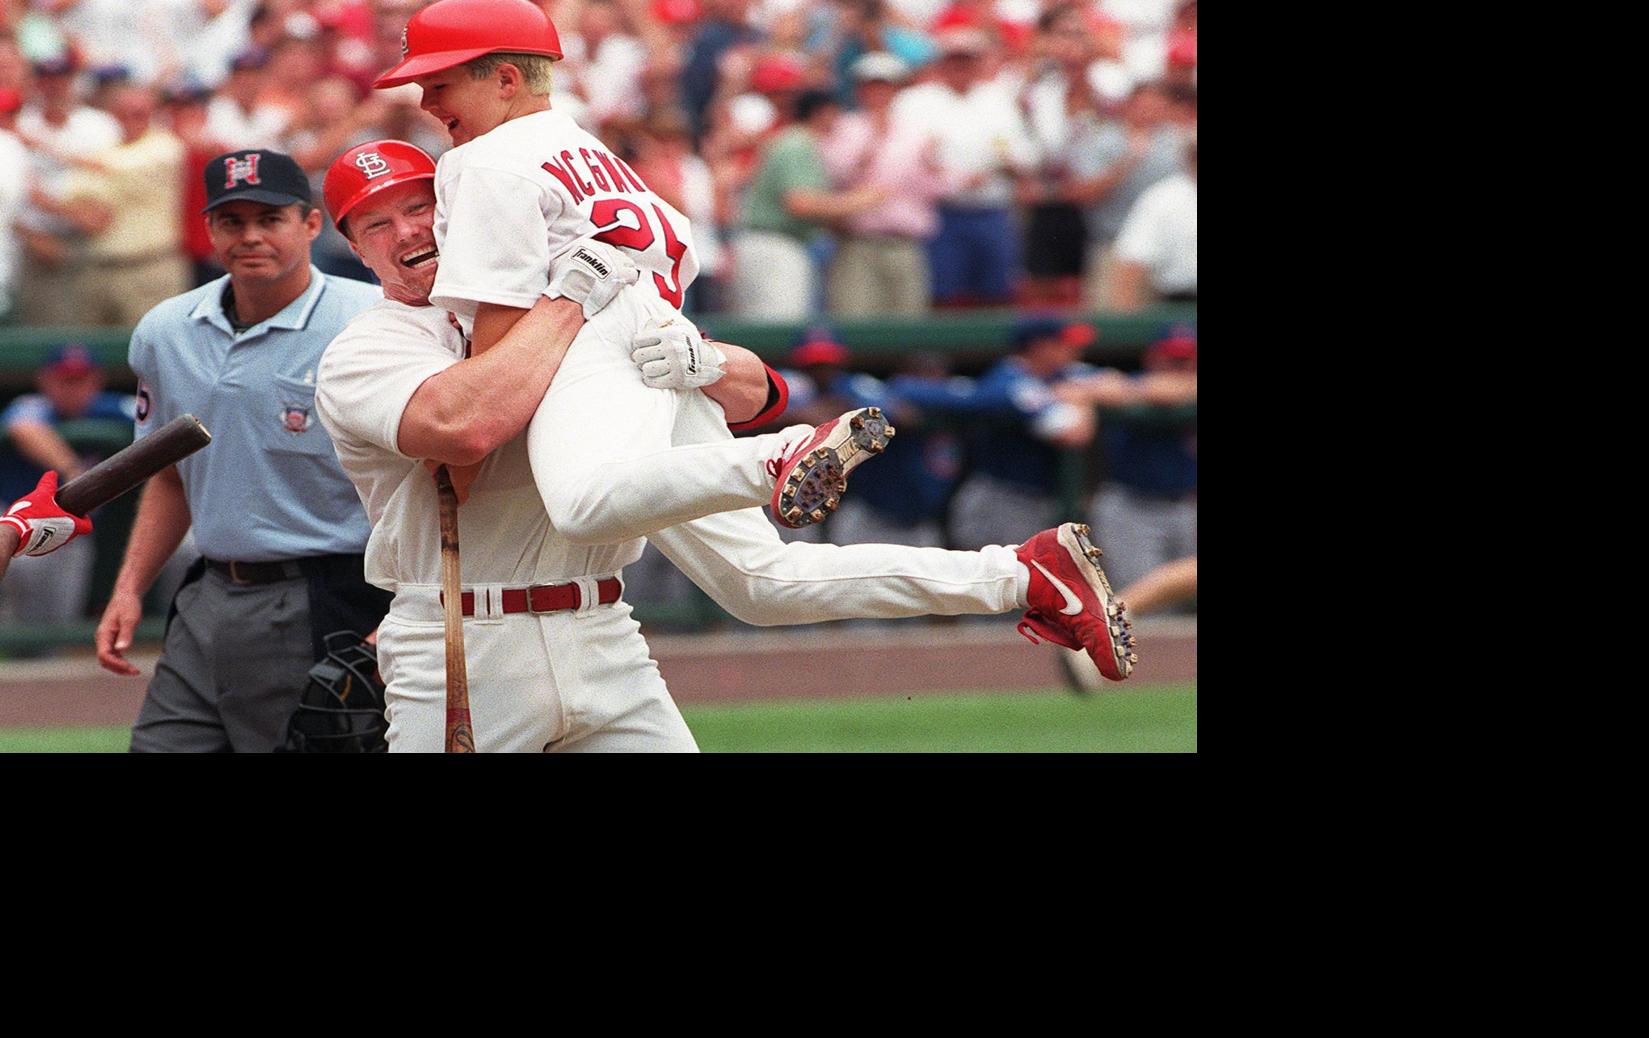 1998 home run chase 25 years later: A look at McGwire, Sosa vs. Reds